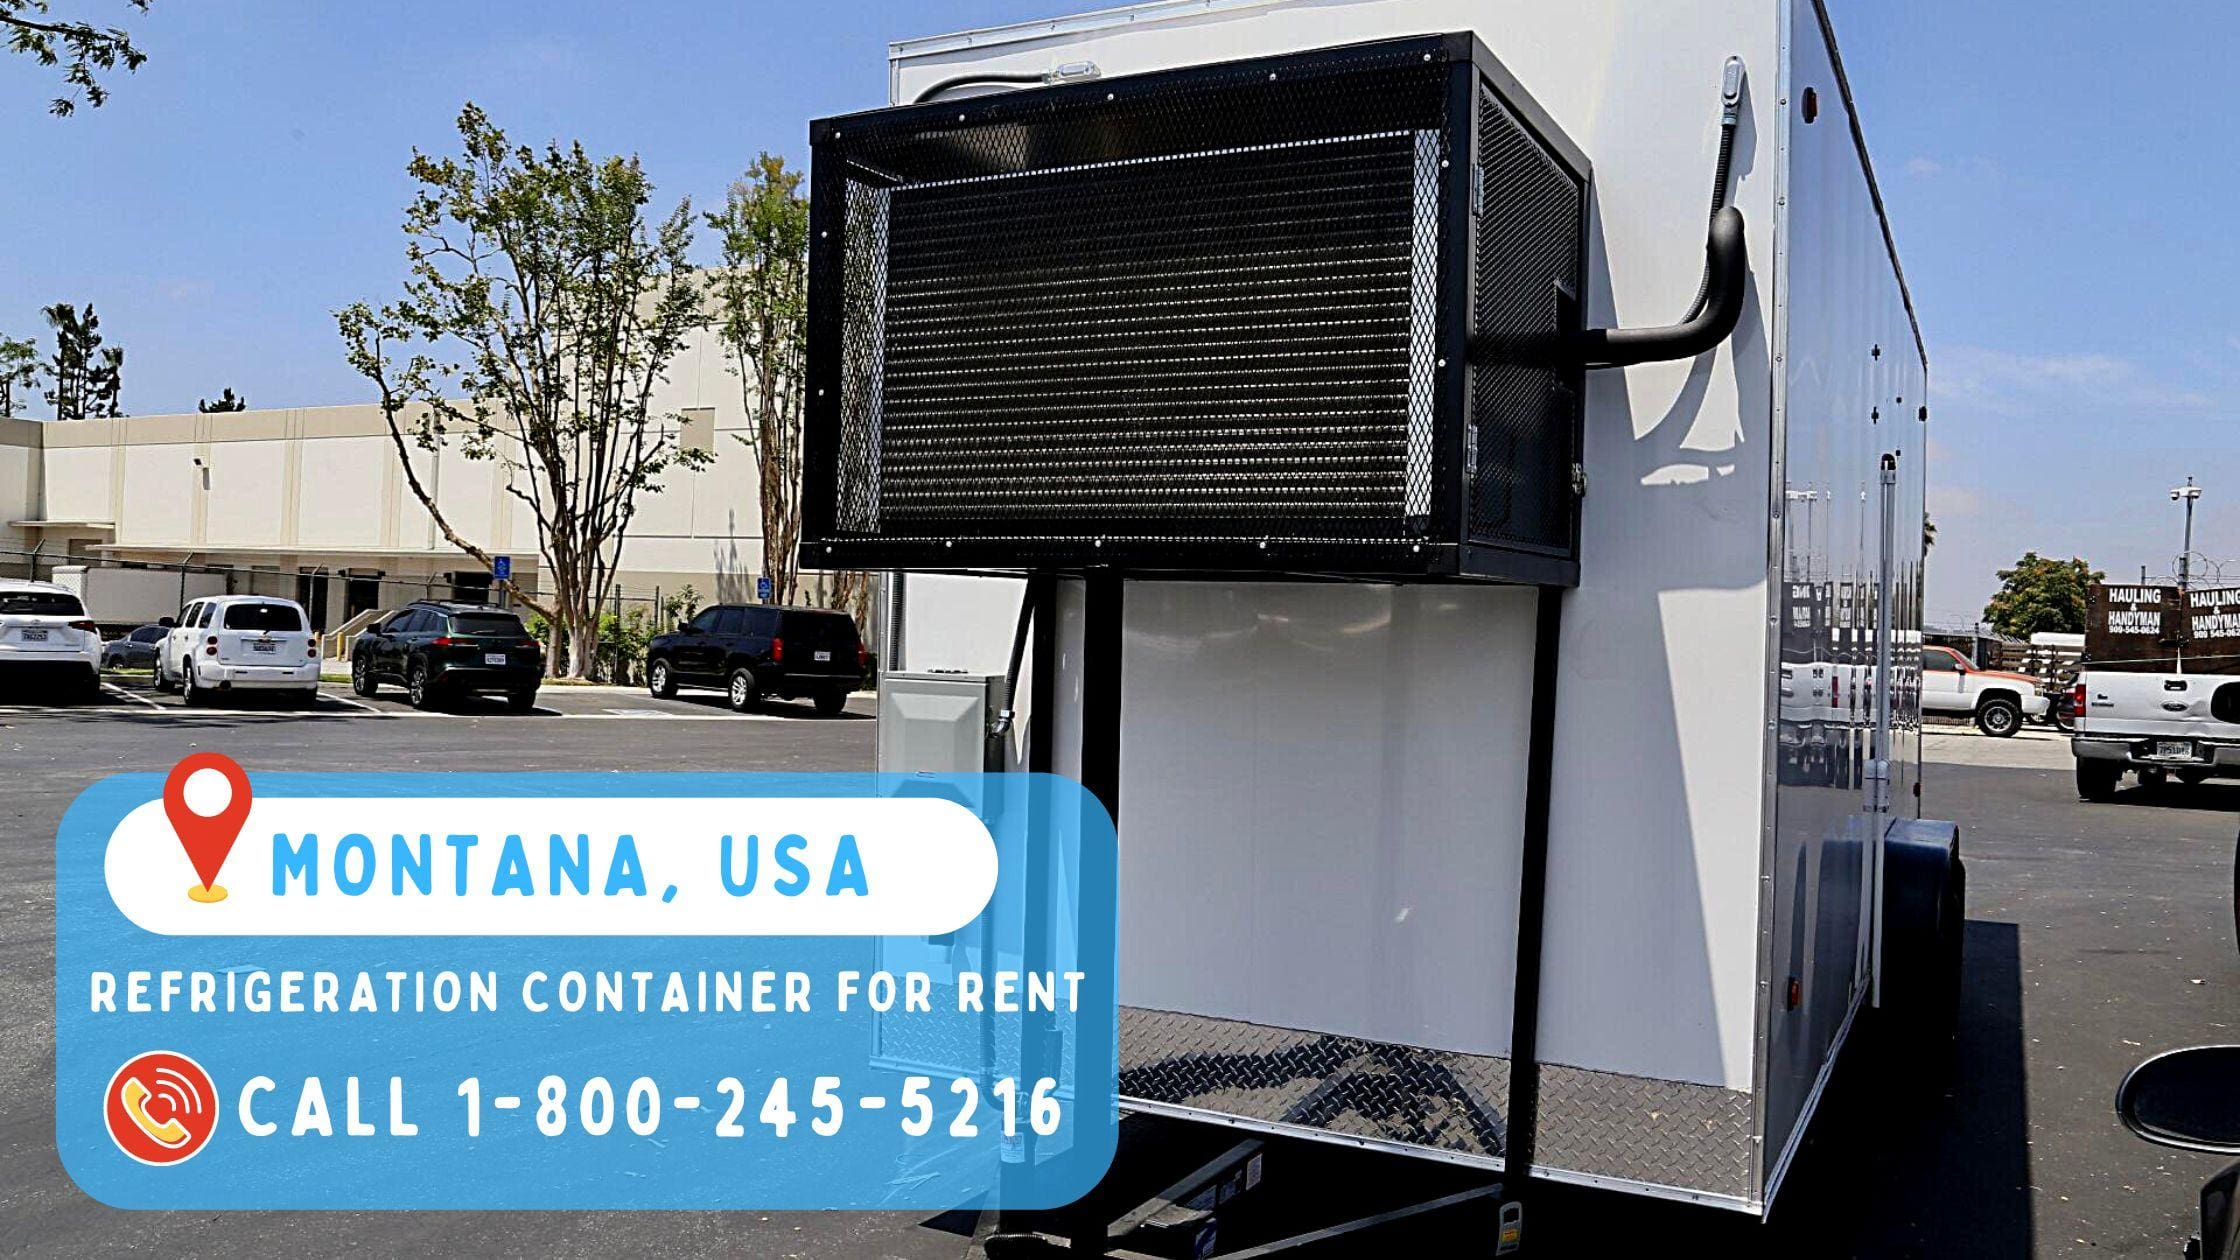 Refrigeration Container for rent in Montana